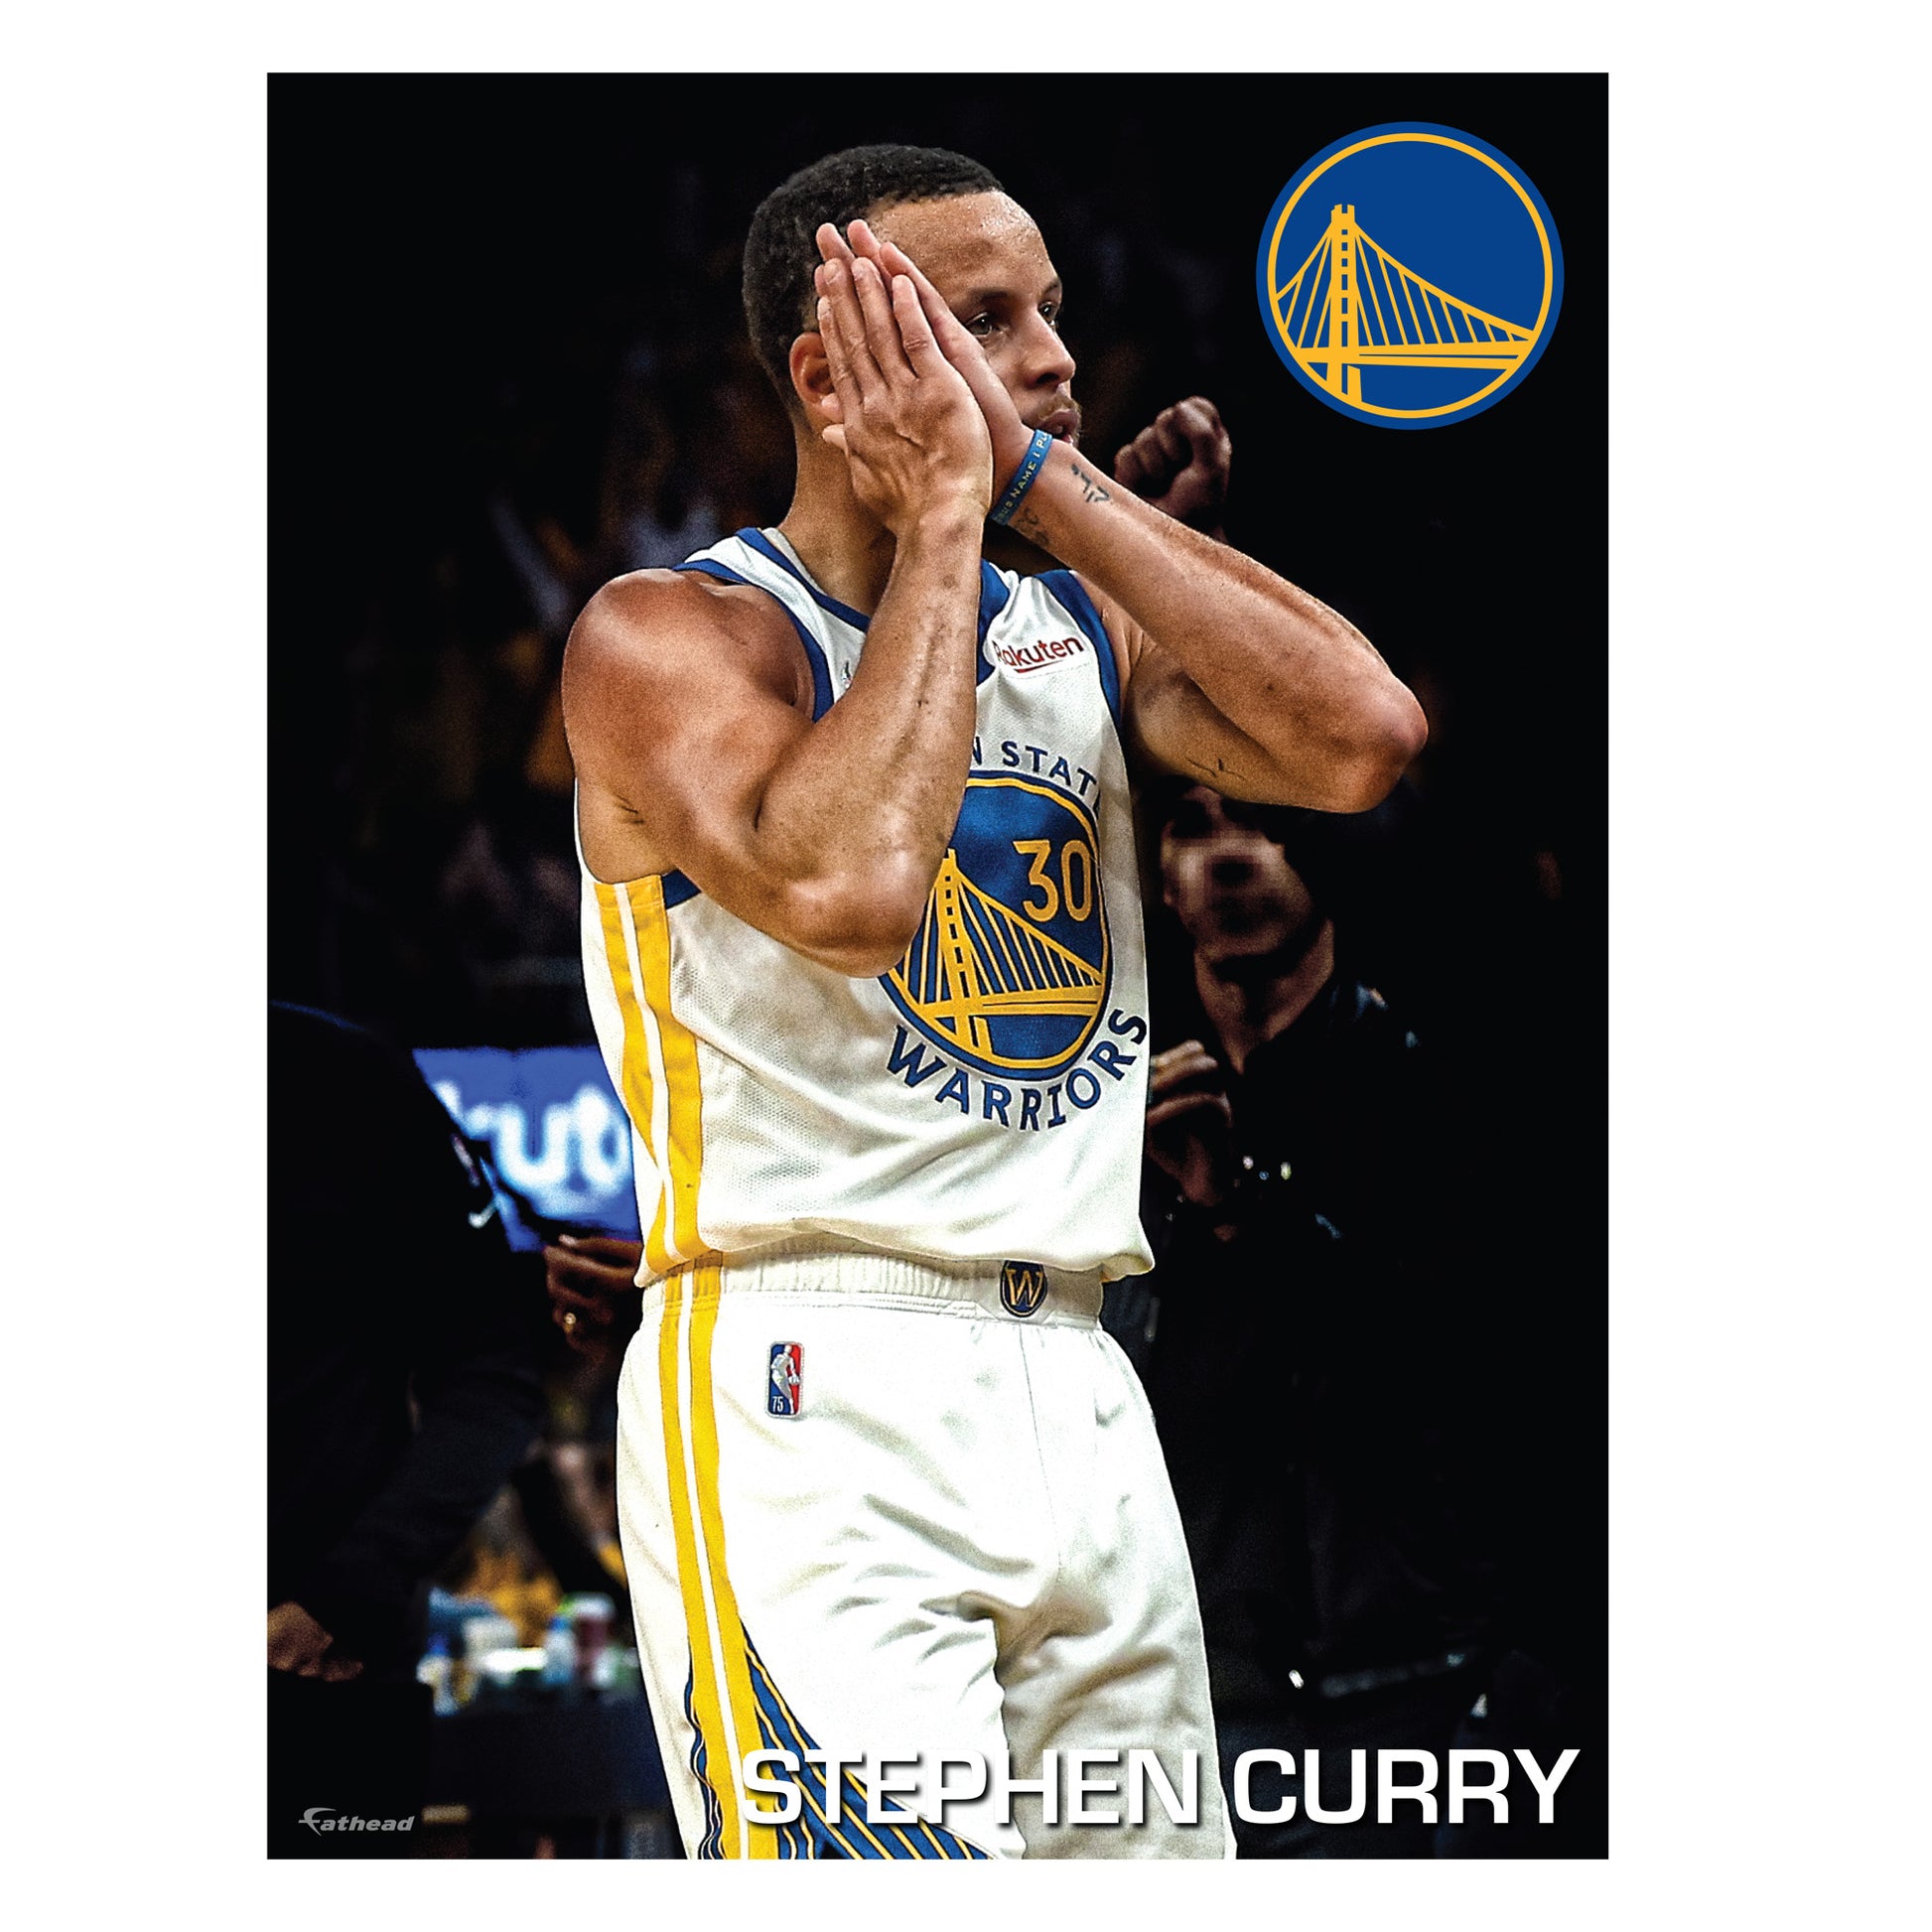 Steph Curry 30 Golden State Warriors basketball player poster